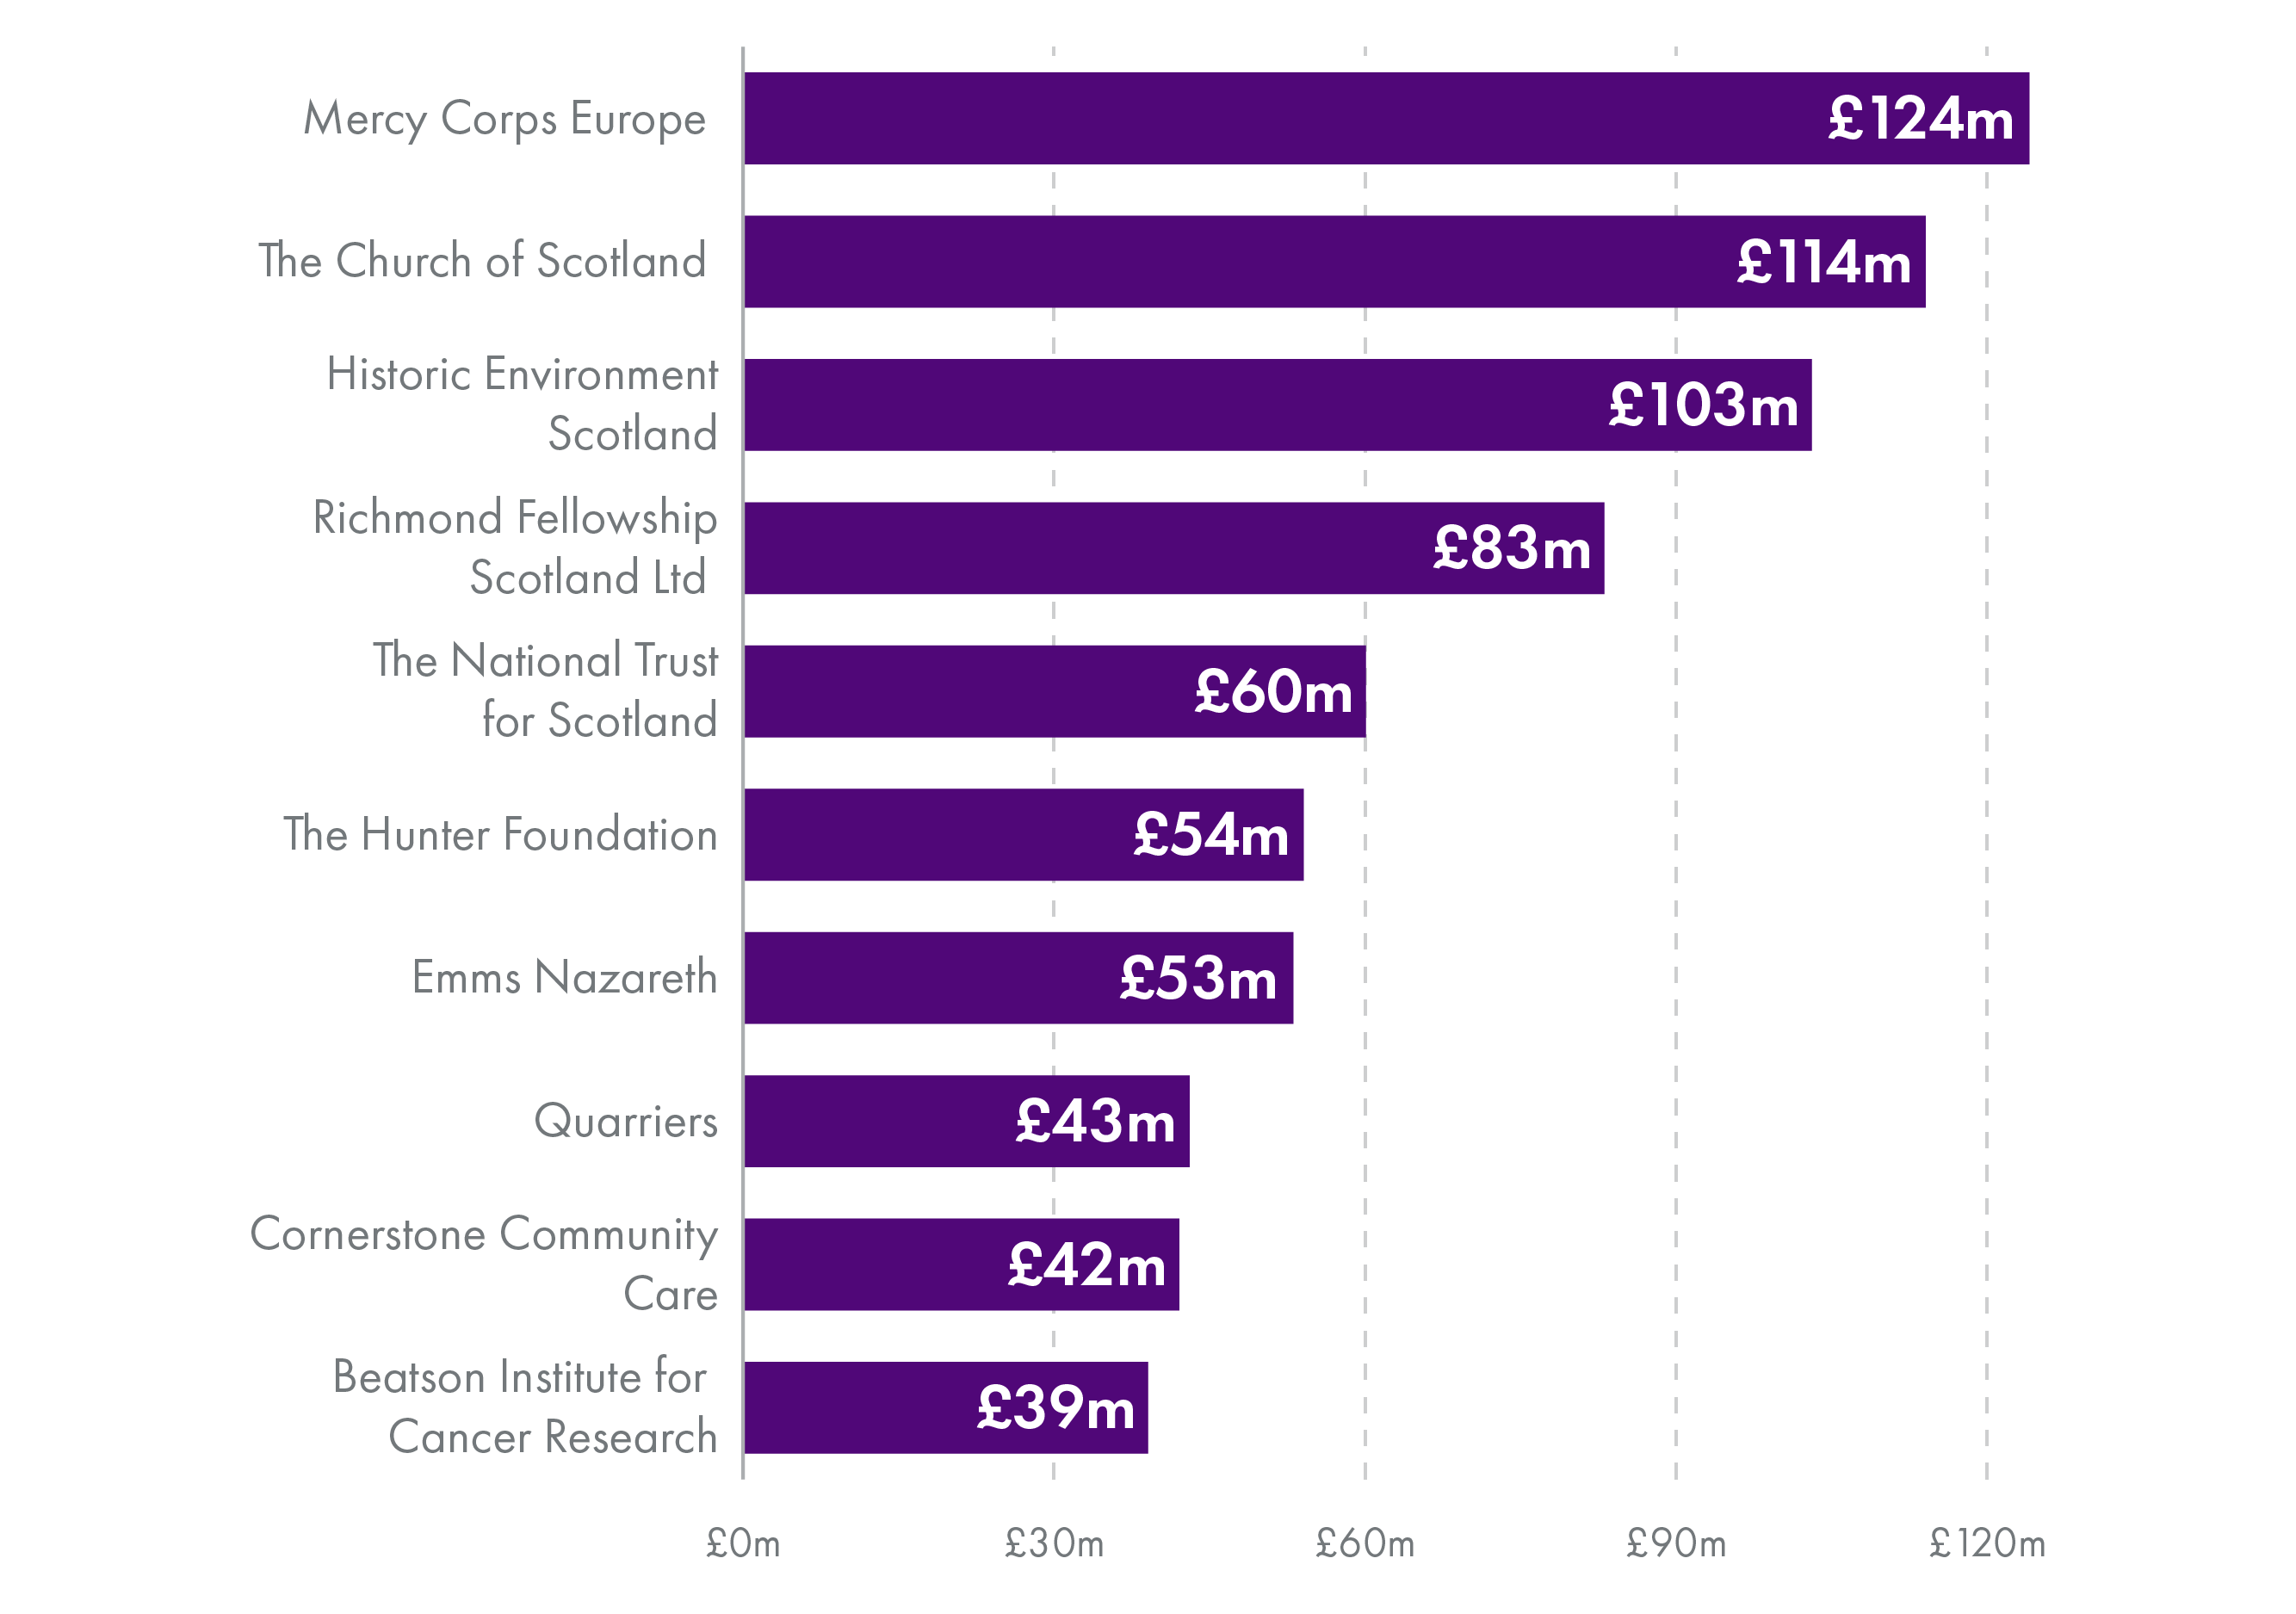 Image showing ten highest income Scottish charities (excluding higher education charities, further education charities, registered social landlords and ALEOs